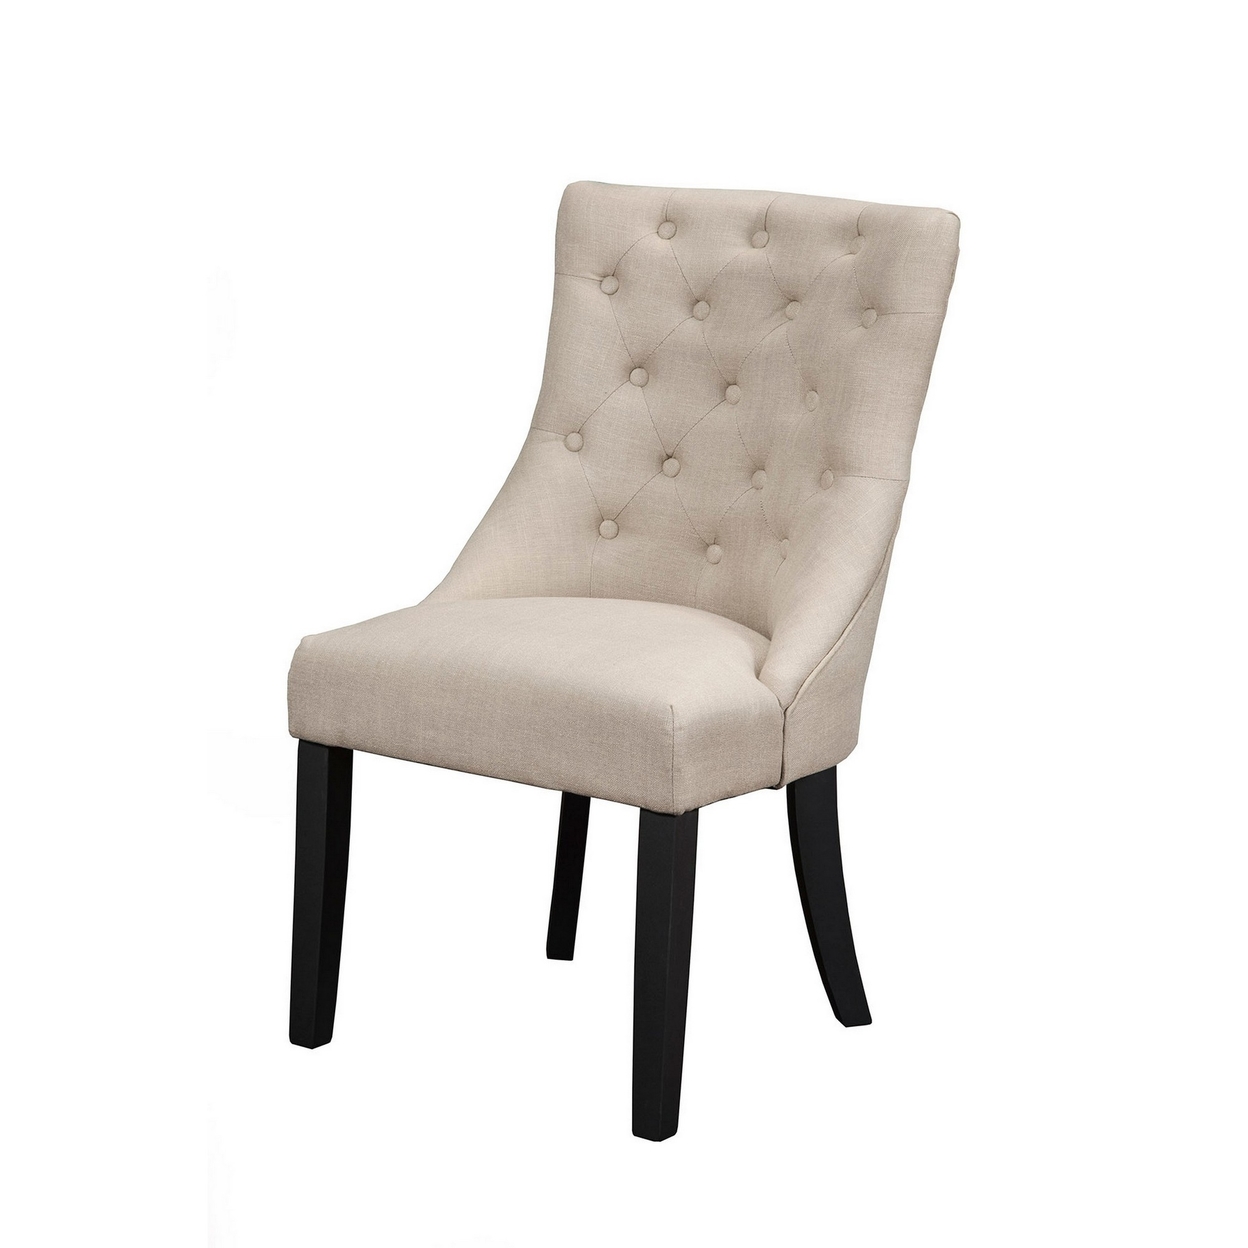 22 Inch Set Of 2 Dining Side Chairs, Tufted Curved Back, Cream Polylinen- Saltoro Sherpi